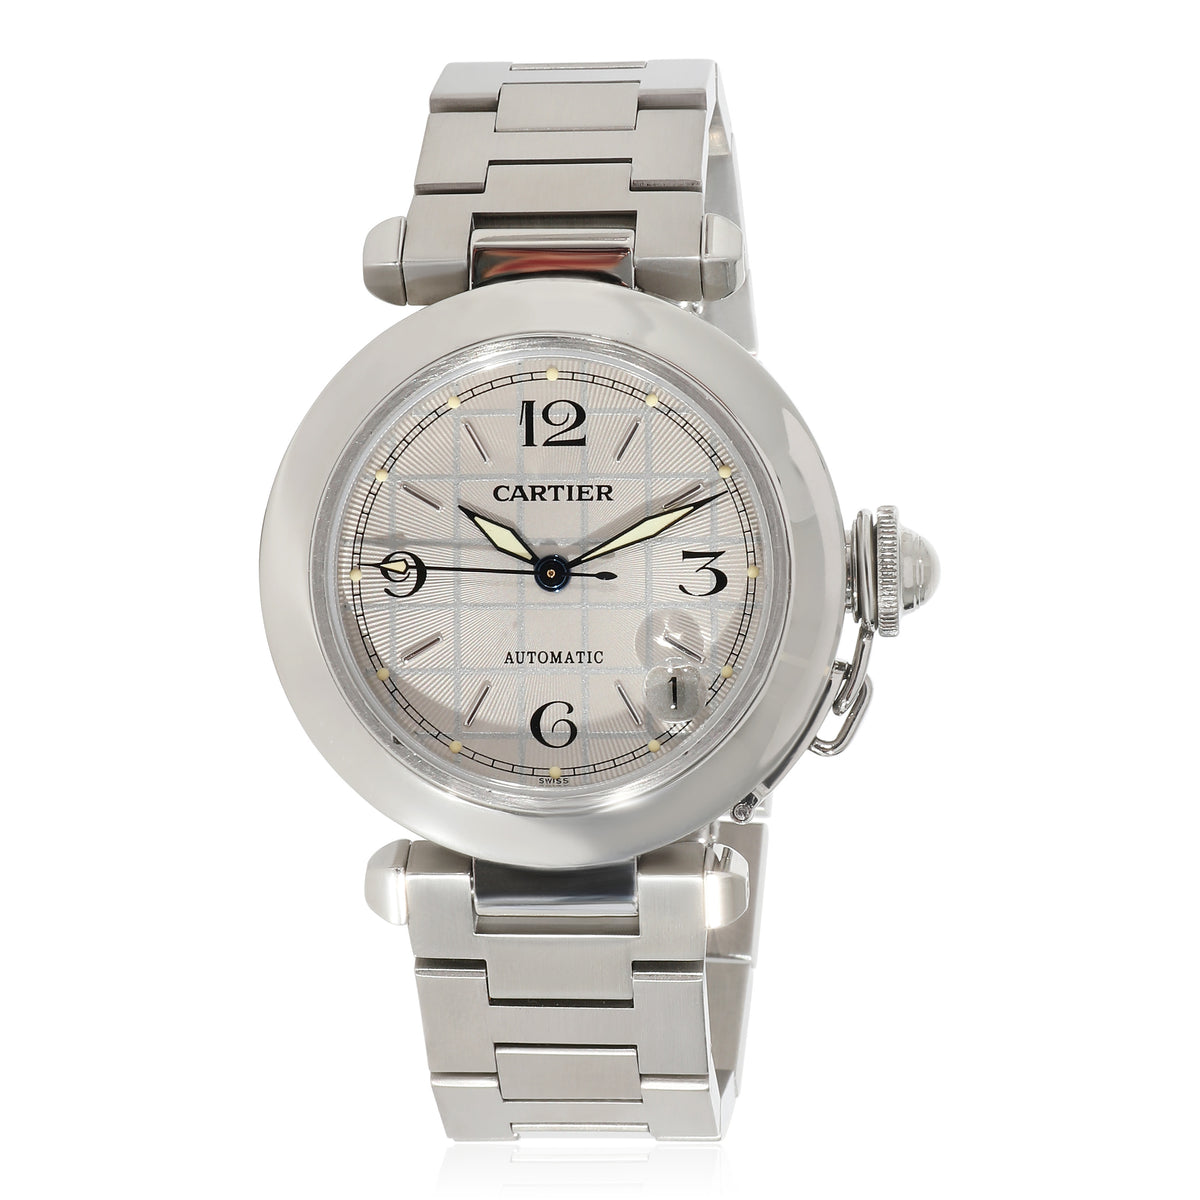 Cartier Pasha C W31023M7 Unisex Watch in  Stainless Steel